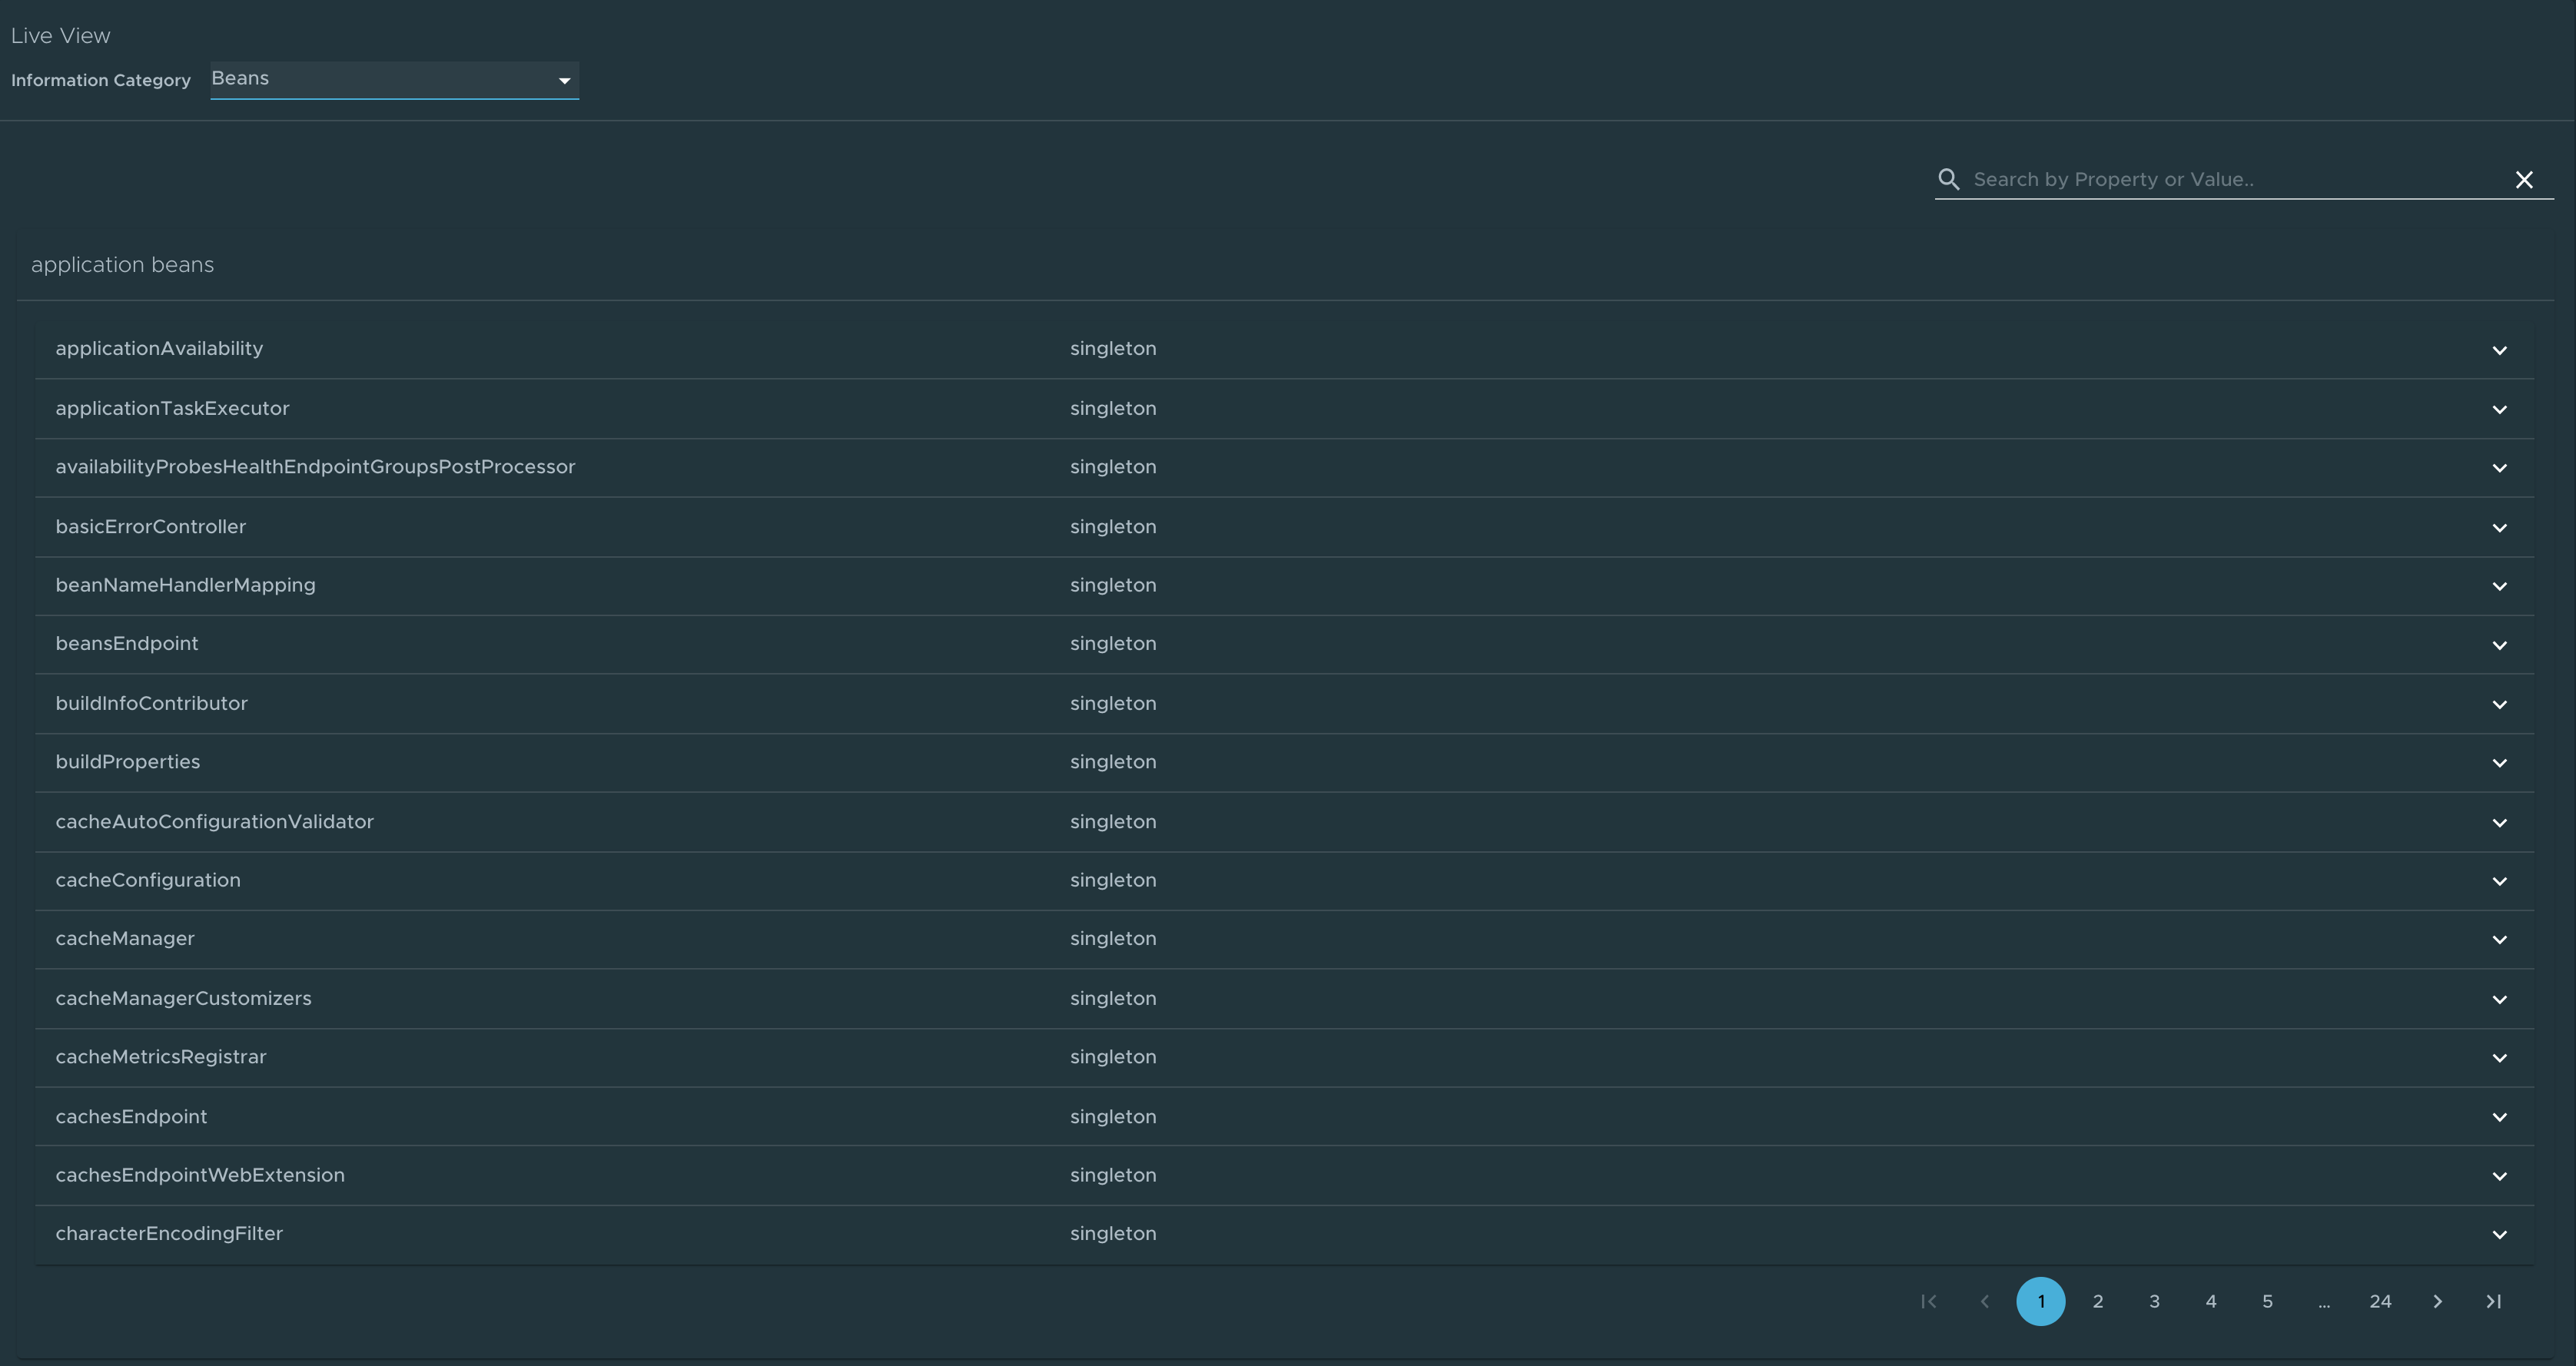 Screenshot of the Beans page in the Application Live View UI.